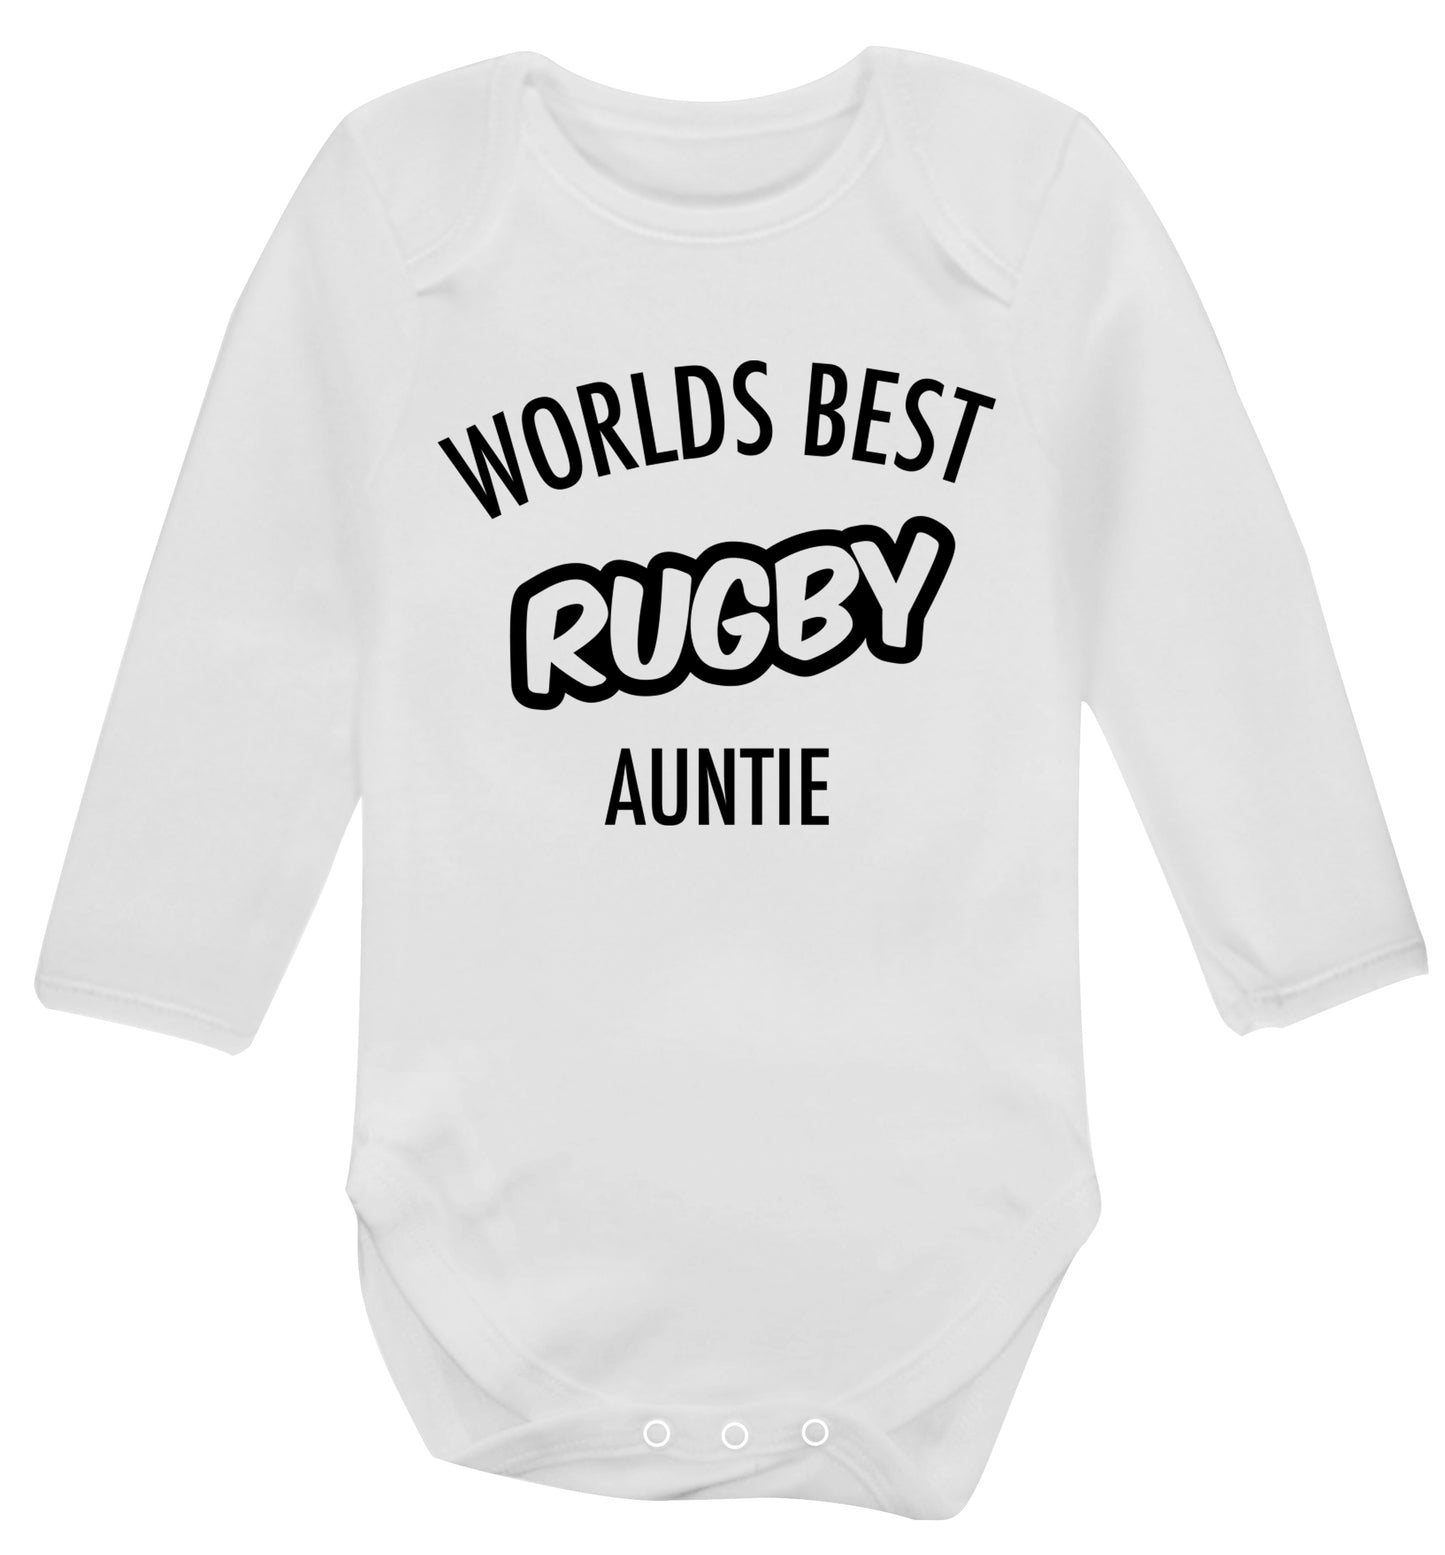 Worlds best rugby auntie Baby Vest long sleeved white 6-12 months